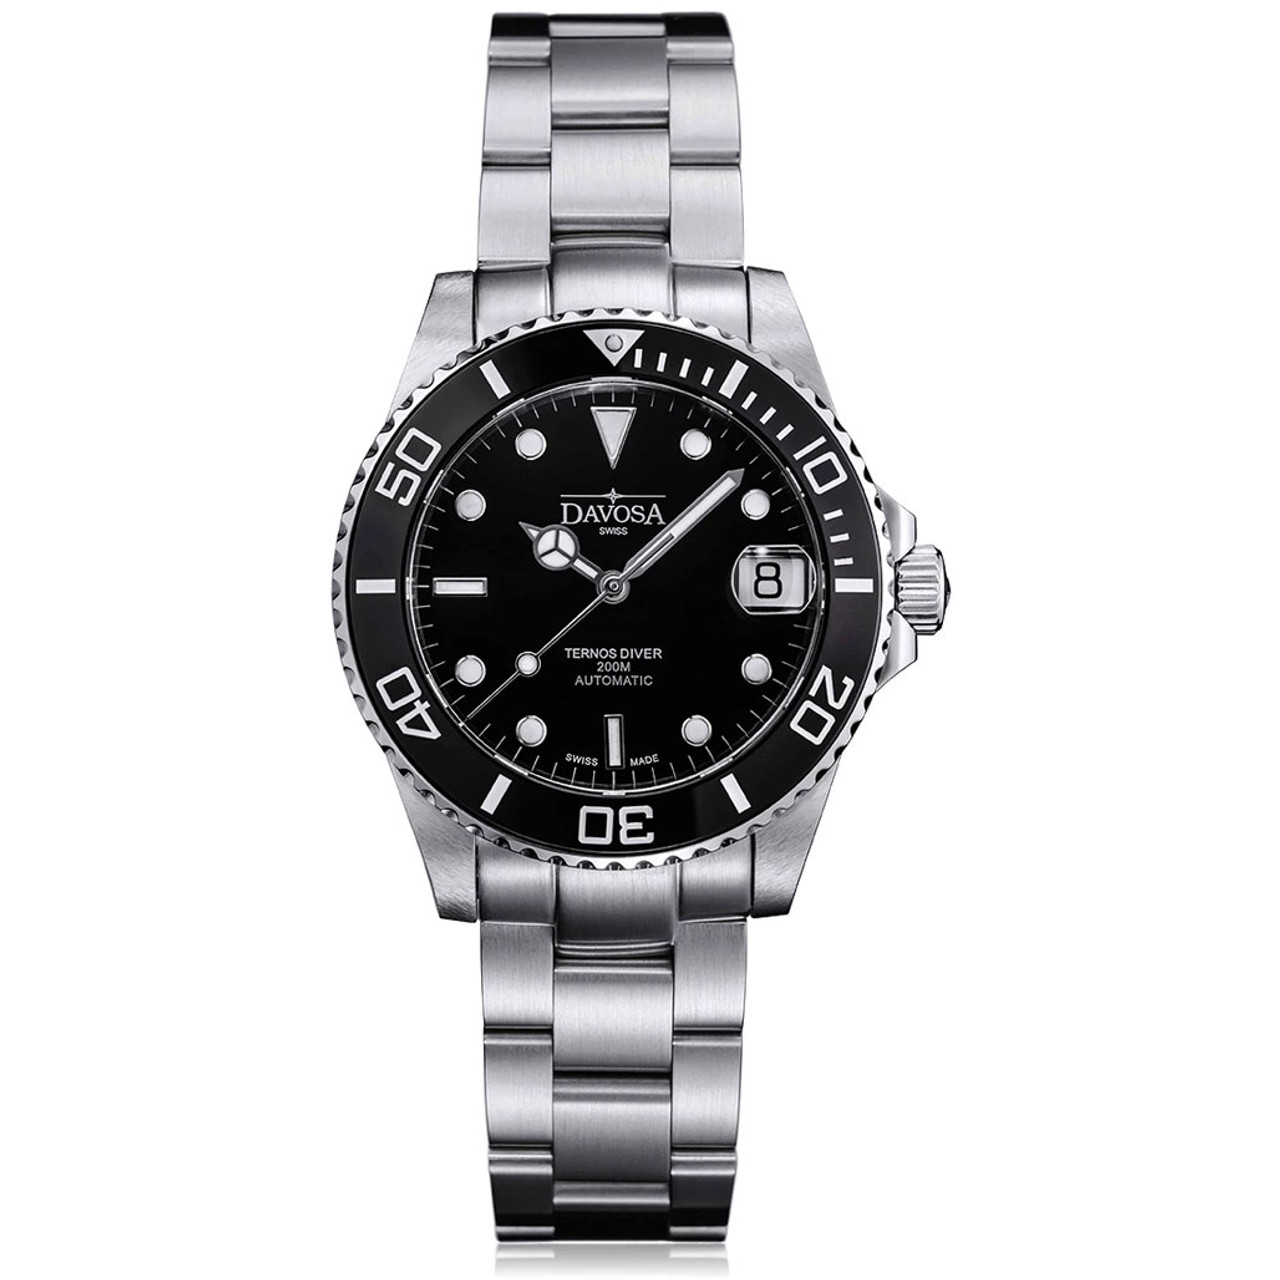 Davosa 36.5mm Medium Ternos Swiss Automatic Dive Watch with Black Dial  #16619550